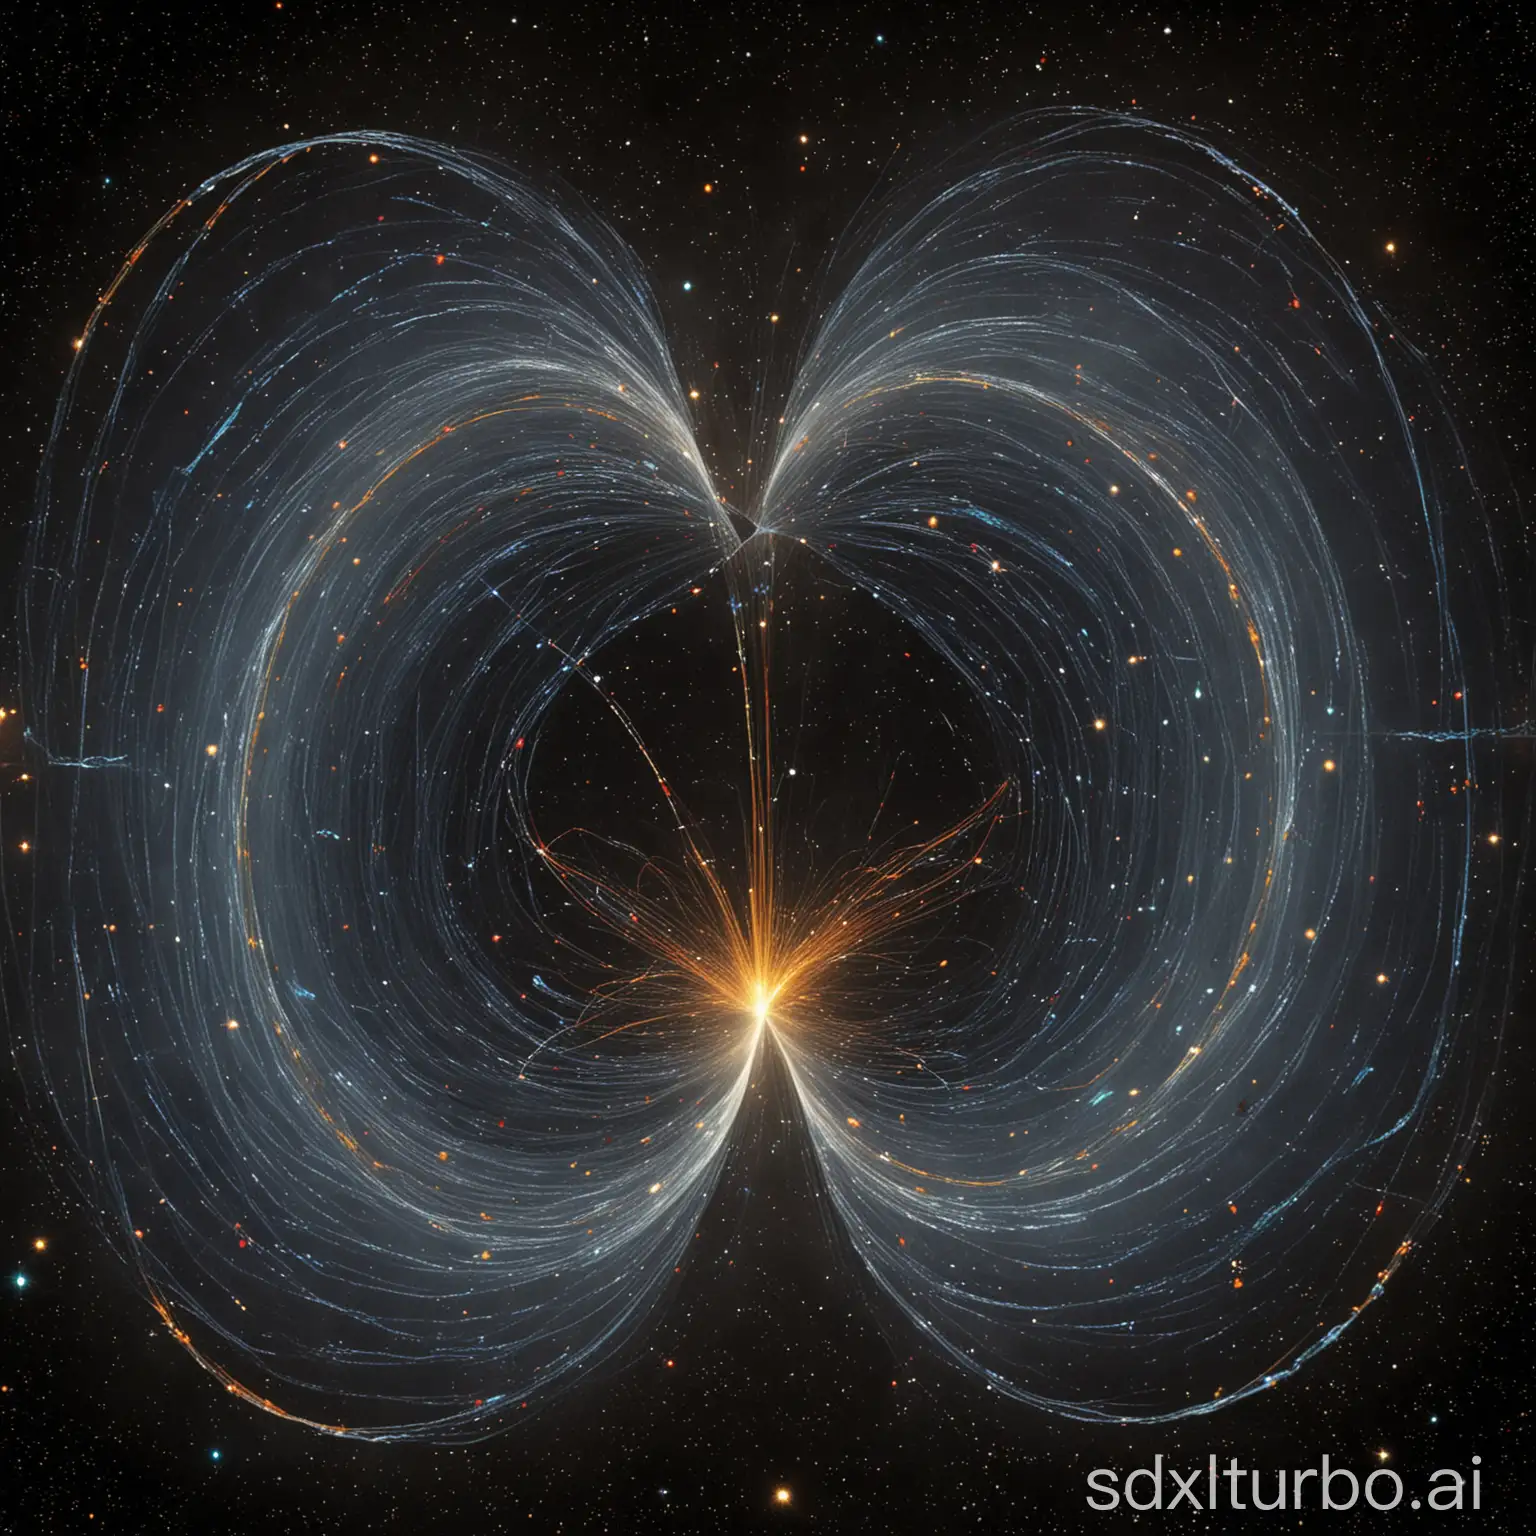 charged particles' trajectories curvature and its radiation in the cosmic space, more density, bulk of trajectories in many directions, around many charge sources